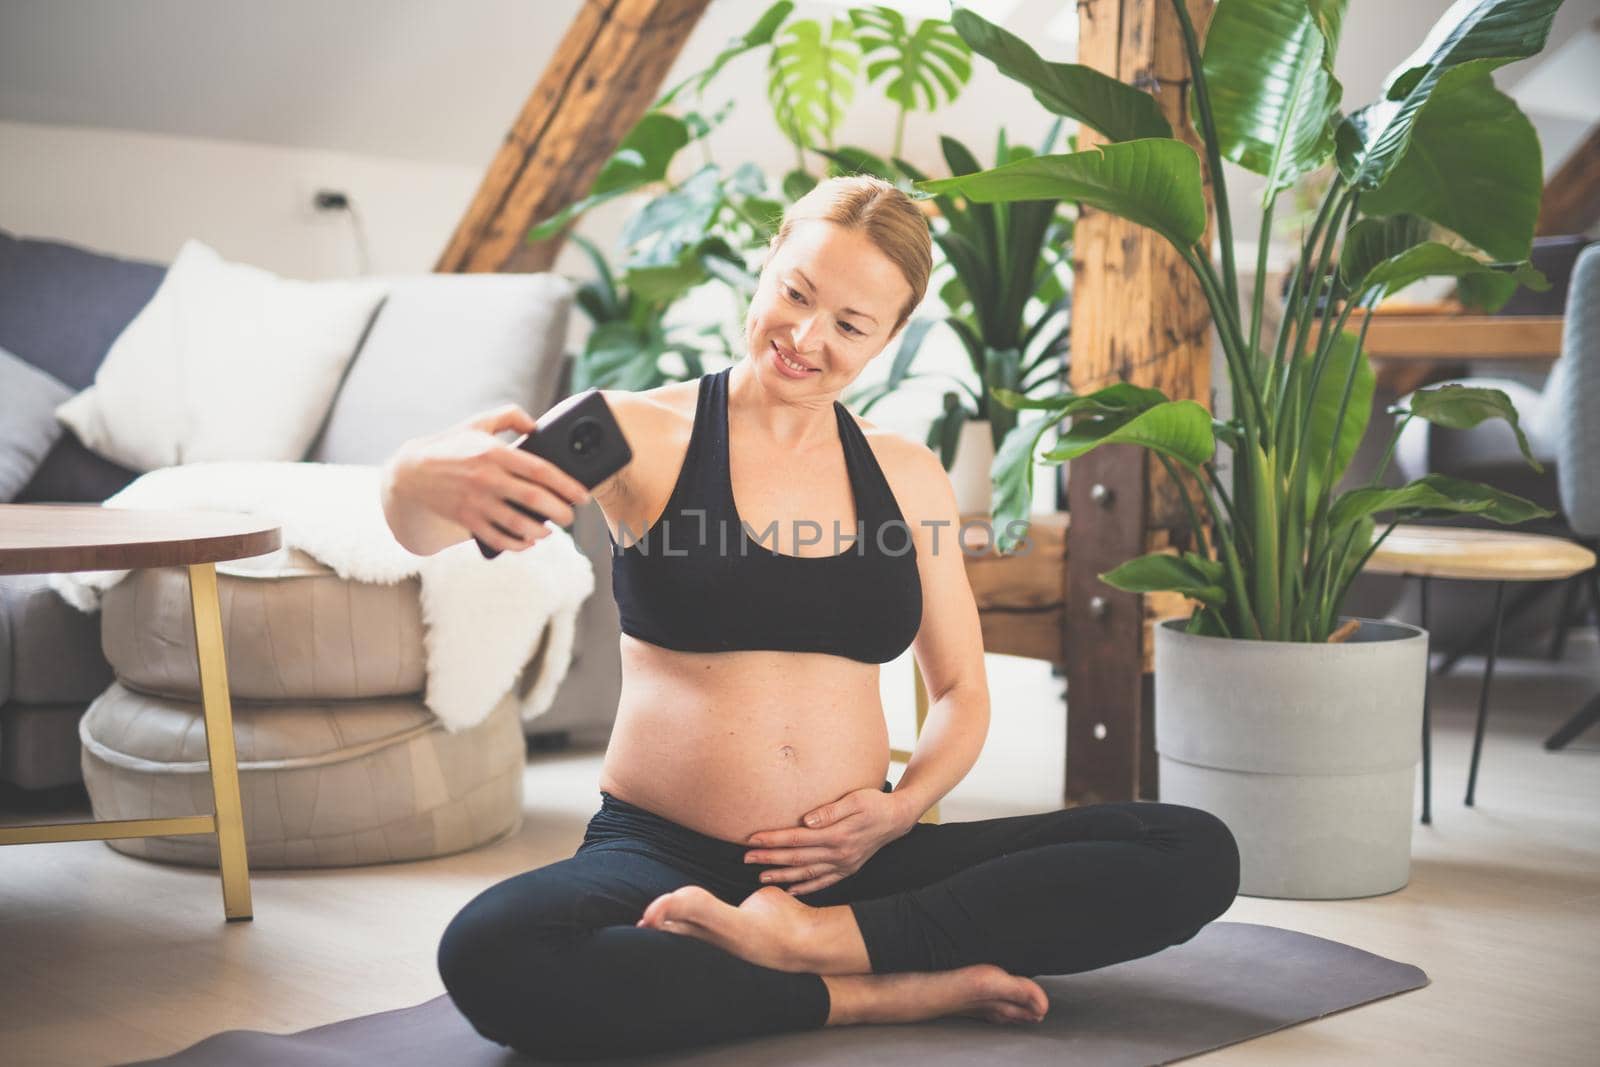 Young happy and cheerful beautiful pregnant woman taking selfie with her mobile phone while staying fit, sporty and active on her maternity leave. Motherhood, pregnancy, yoga concept. by kasto